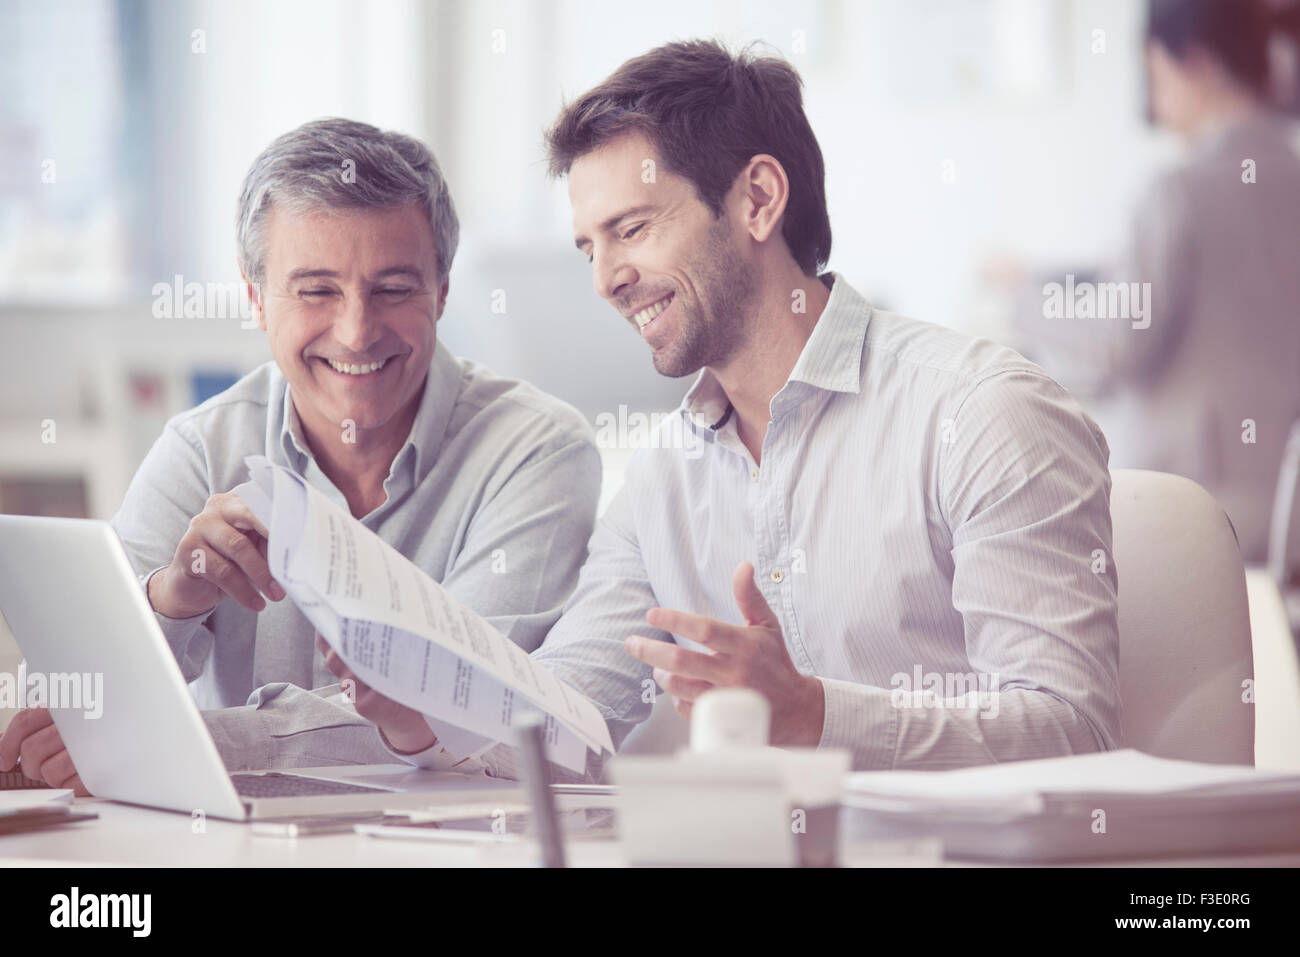 Colleagues discussing work in office Stock Photo